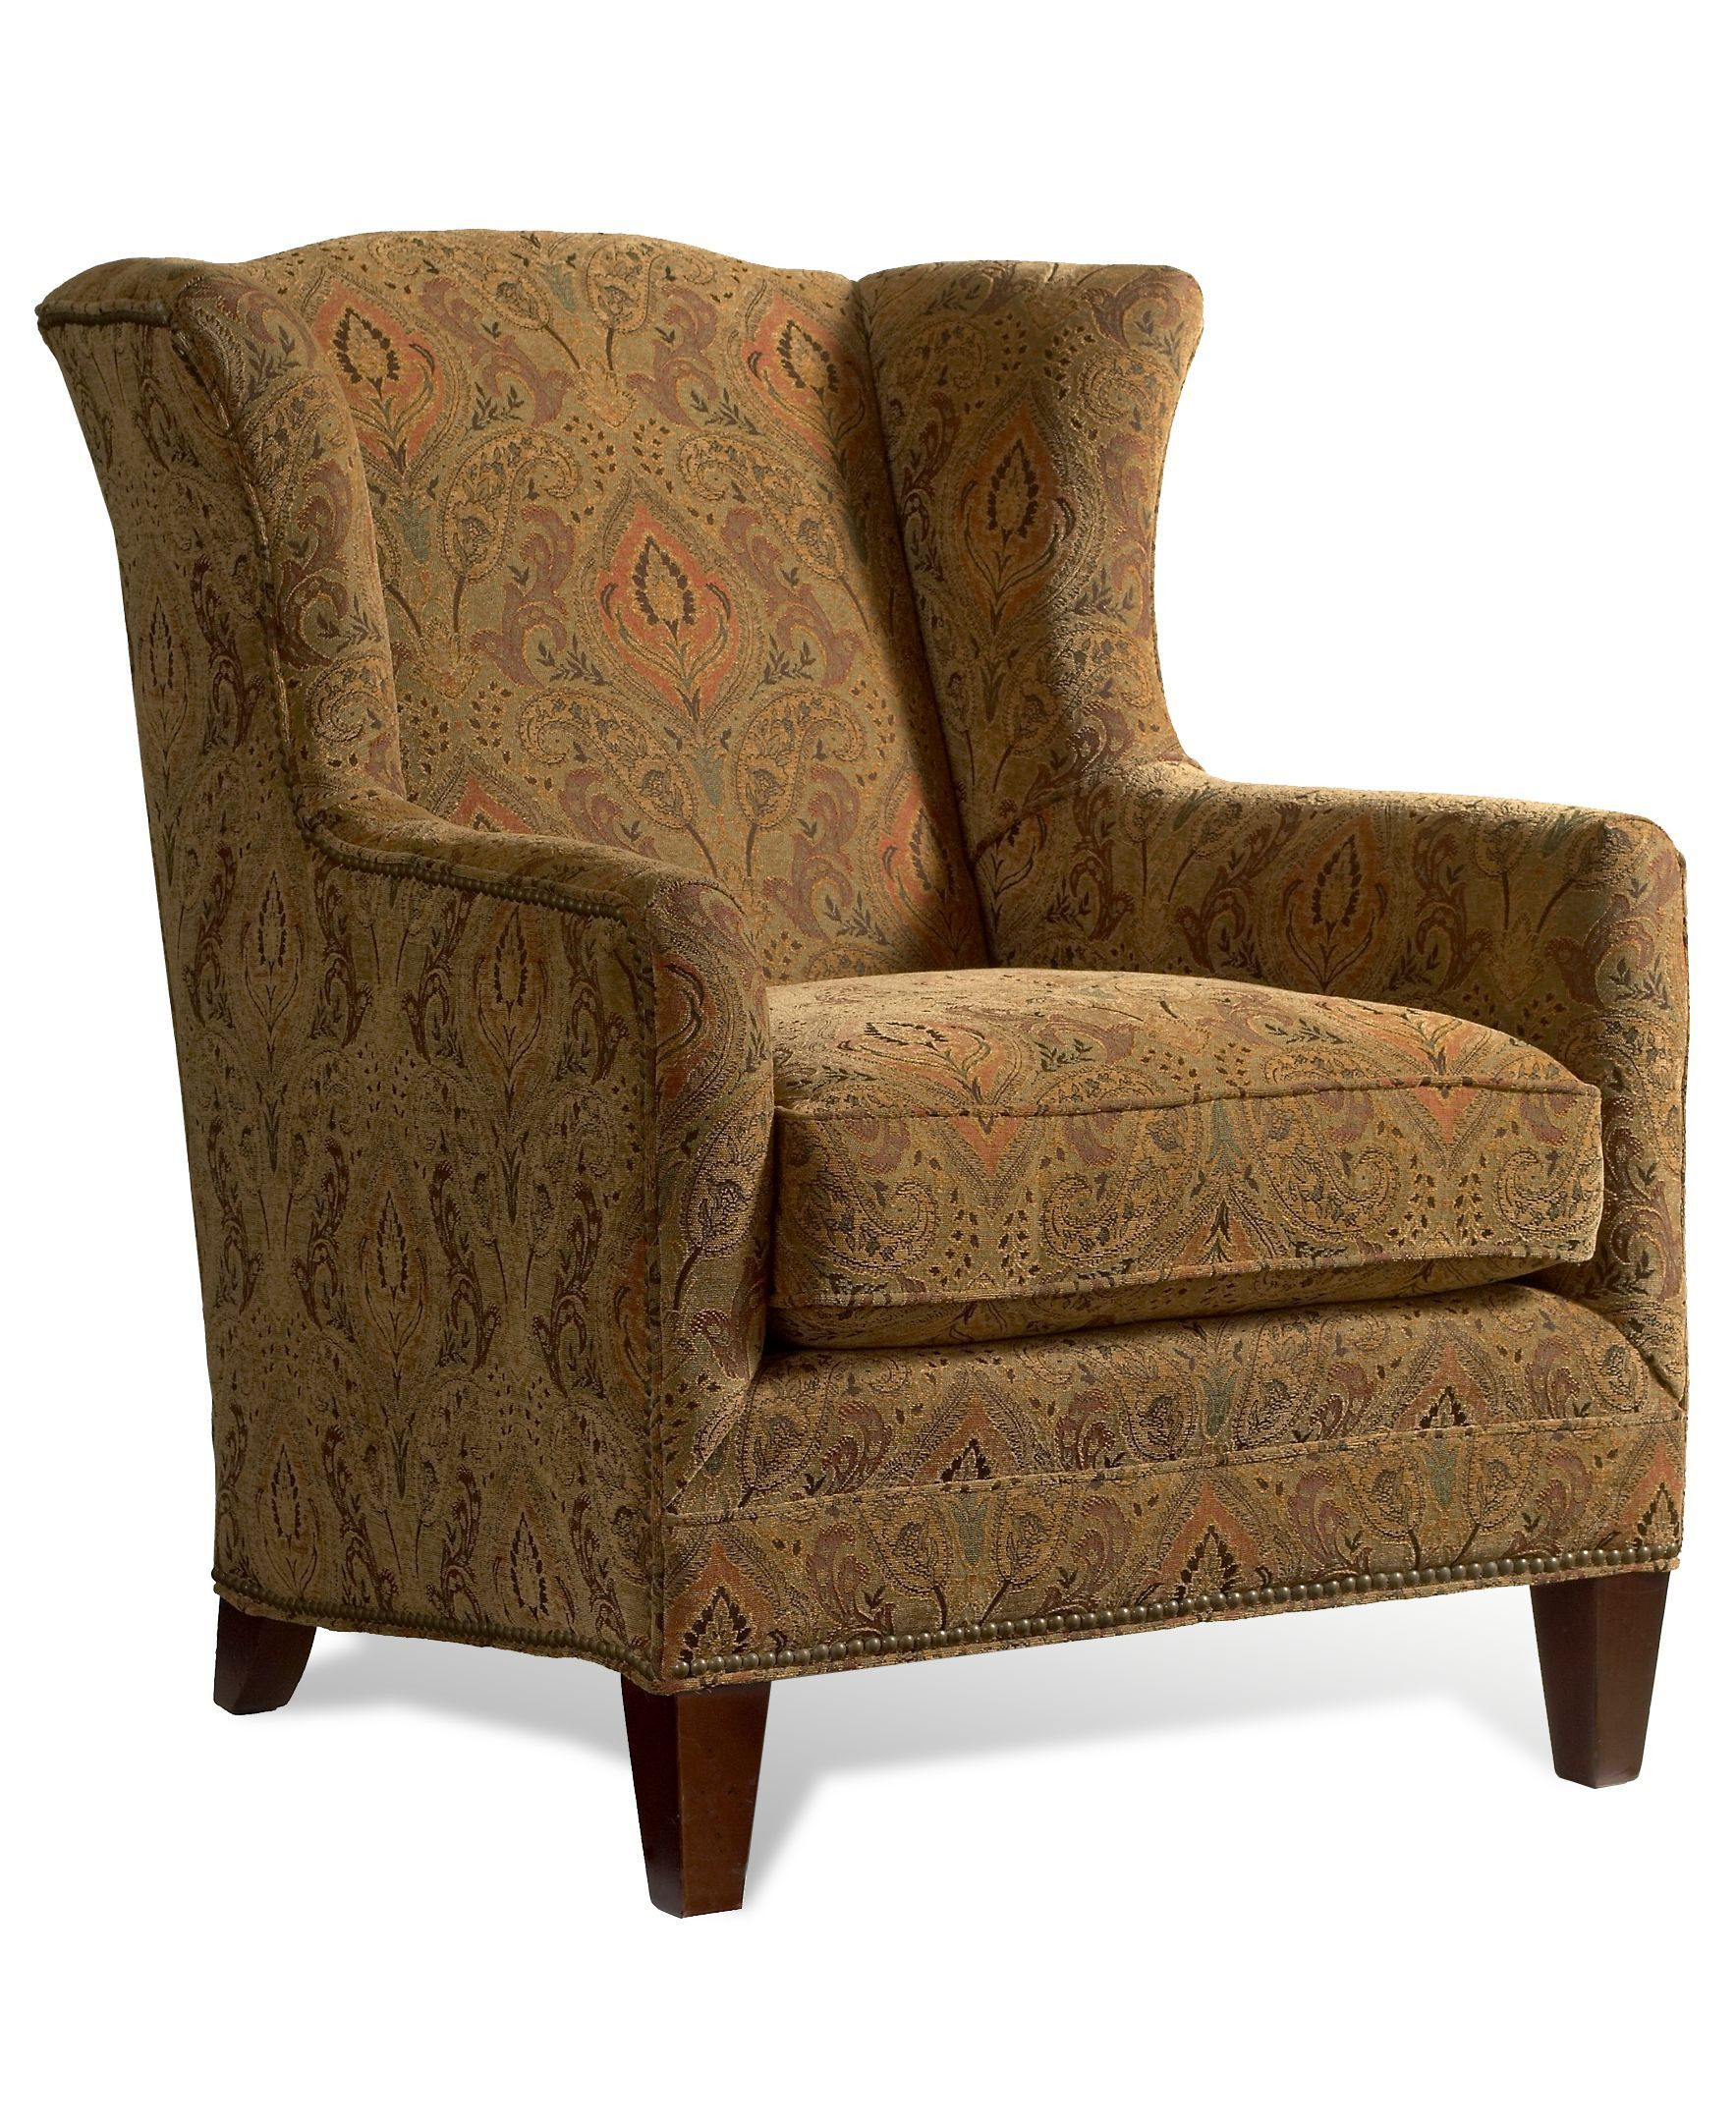 Wing Chairs For Living Room
 Madison Living Room Wing Chair